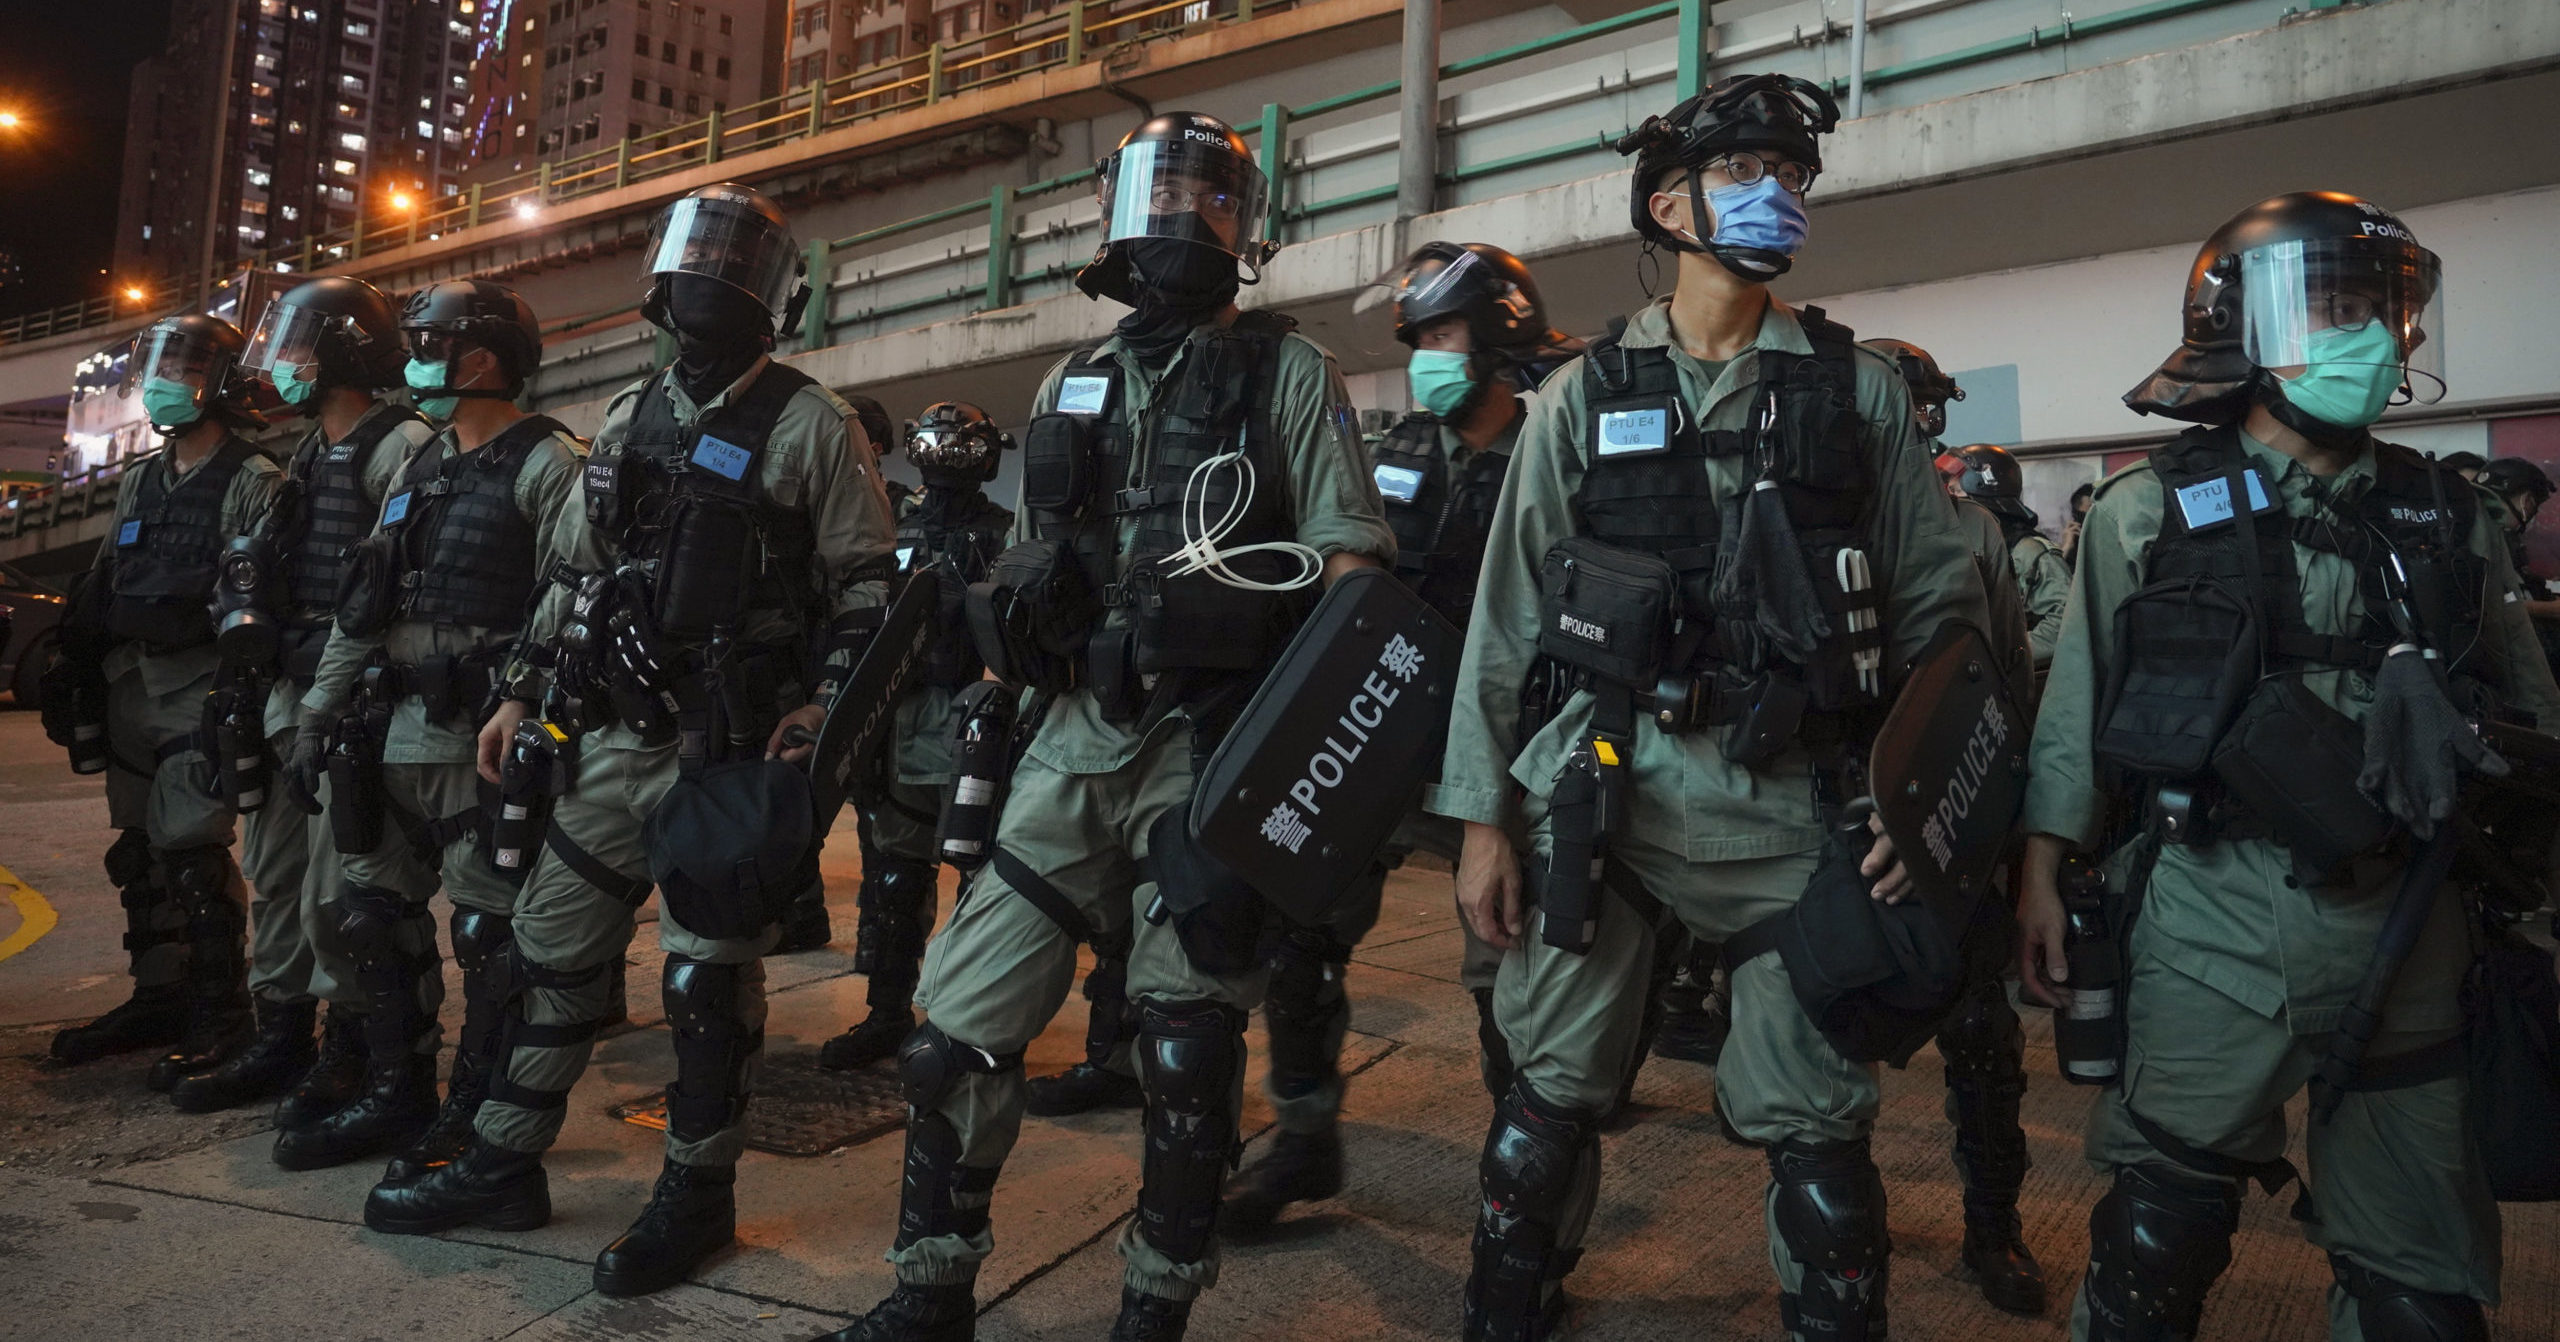 Riot police stand guard at a protest against the new security law during the anniversary of the Hong Kong handover from Britain on July 1, 2020, in Hong Kong. Hong Kong police have made their first arrests under a new national security law imposed by mainland China. The law, which took effect Tuesday night, makes activities deemed subversive or secessionist punishable by up to life in prison.